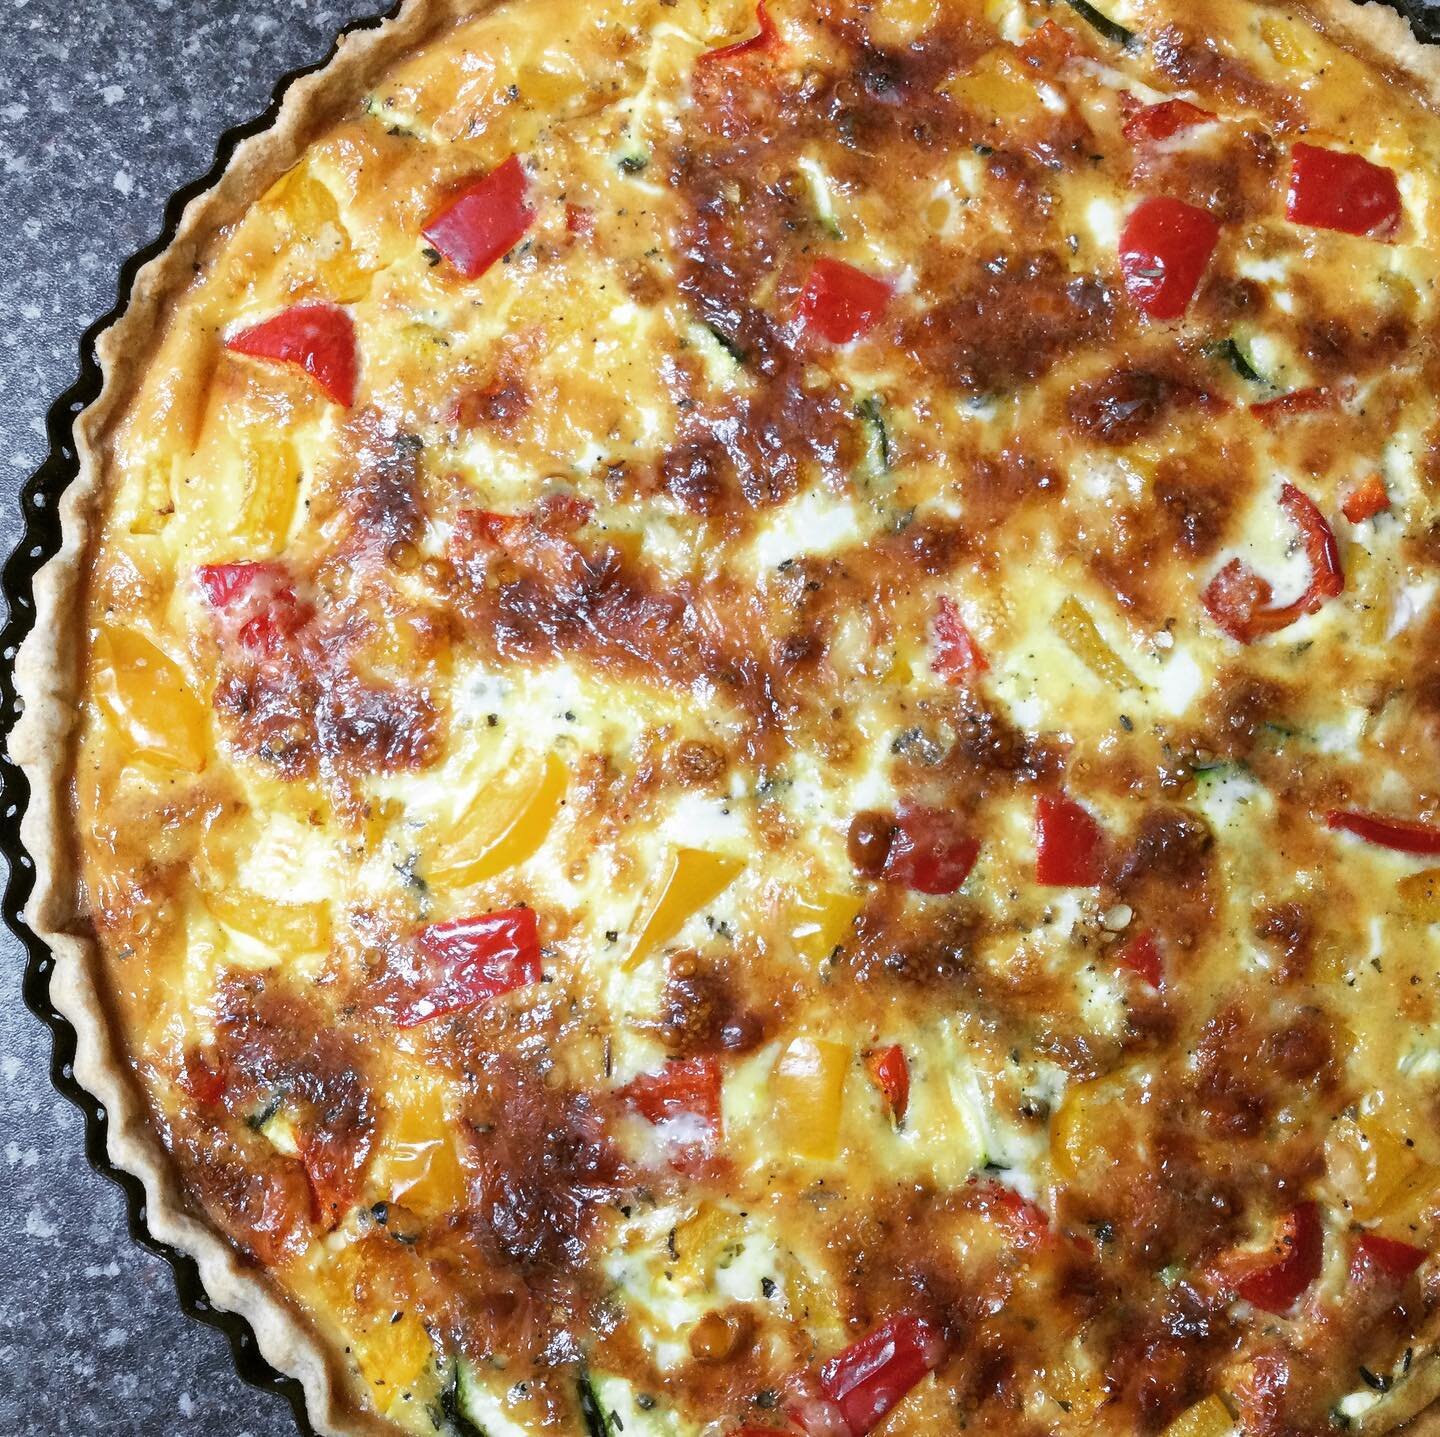 Good morning everyone!  Well it&rsquo;s a cold, grey morning here in Northumberland, so here&rsquo;s a delicious quiche, fresh out of the oven, to hopefully brighten your day!  Roll on the spring sunshine!! #goodfood #homemadefood #food #freerangeegg